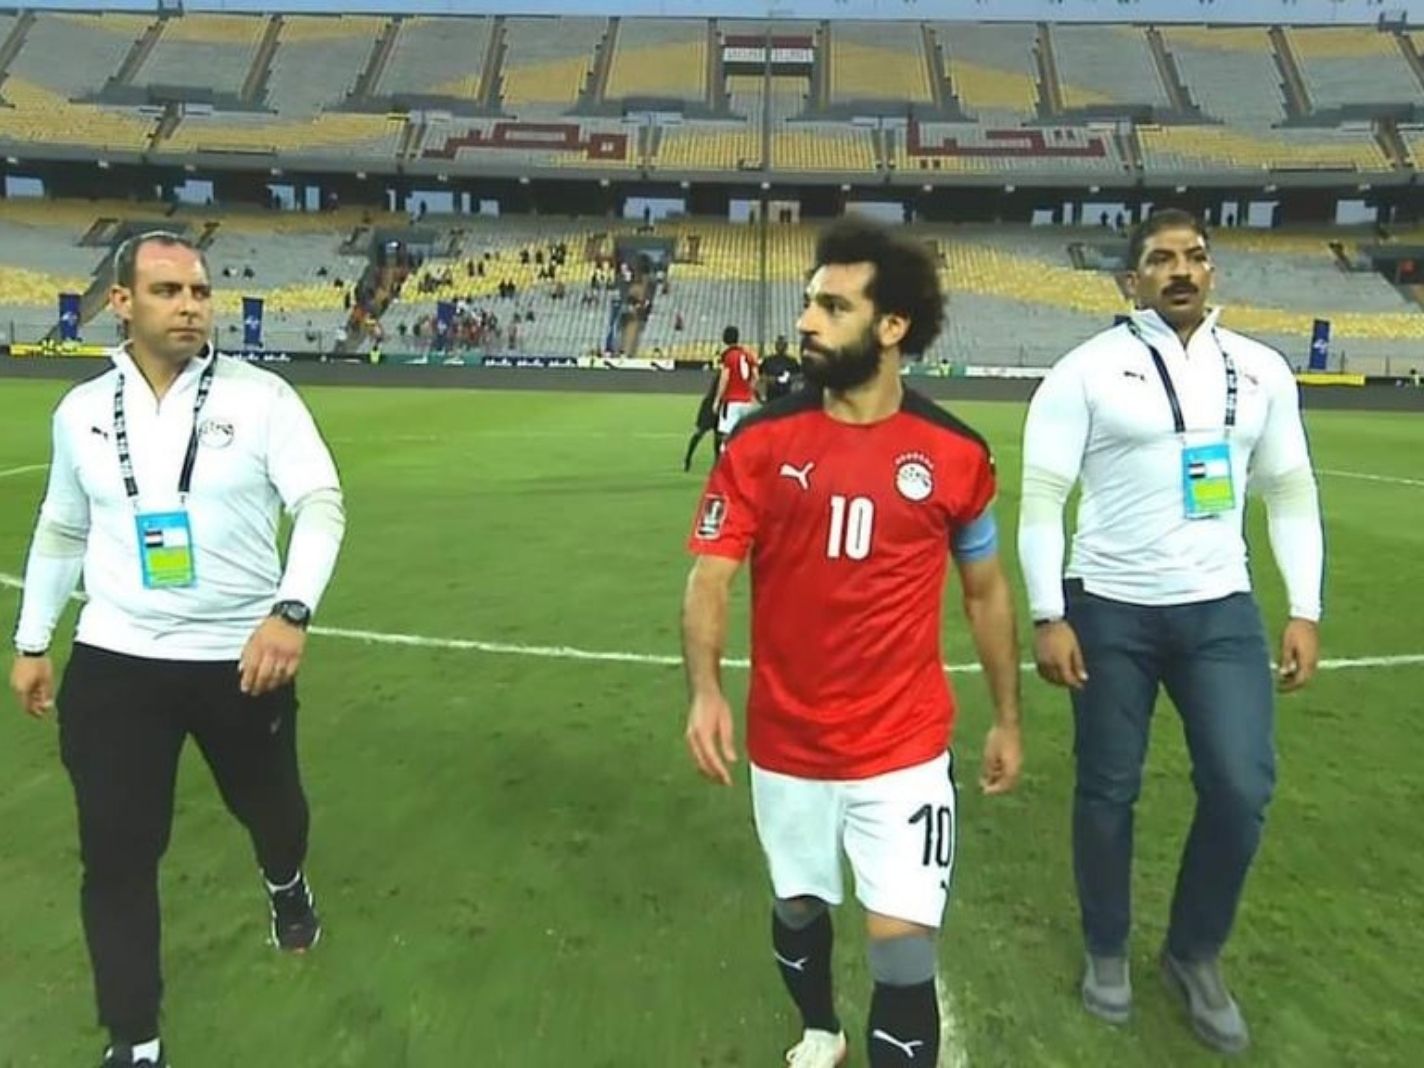 Mohamed Salah armed with heavy security after fan incident on intl duty